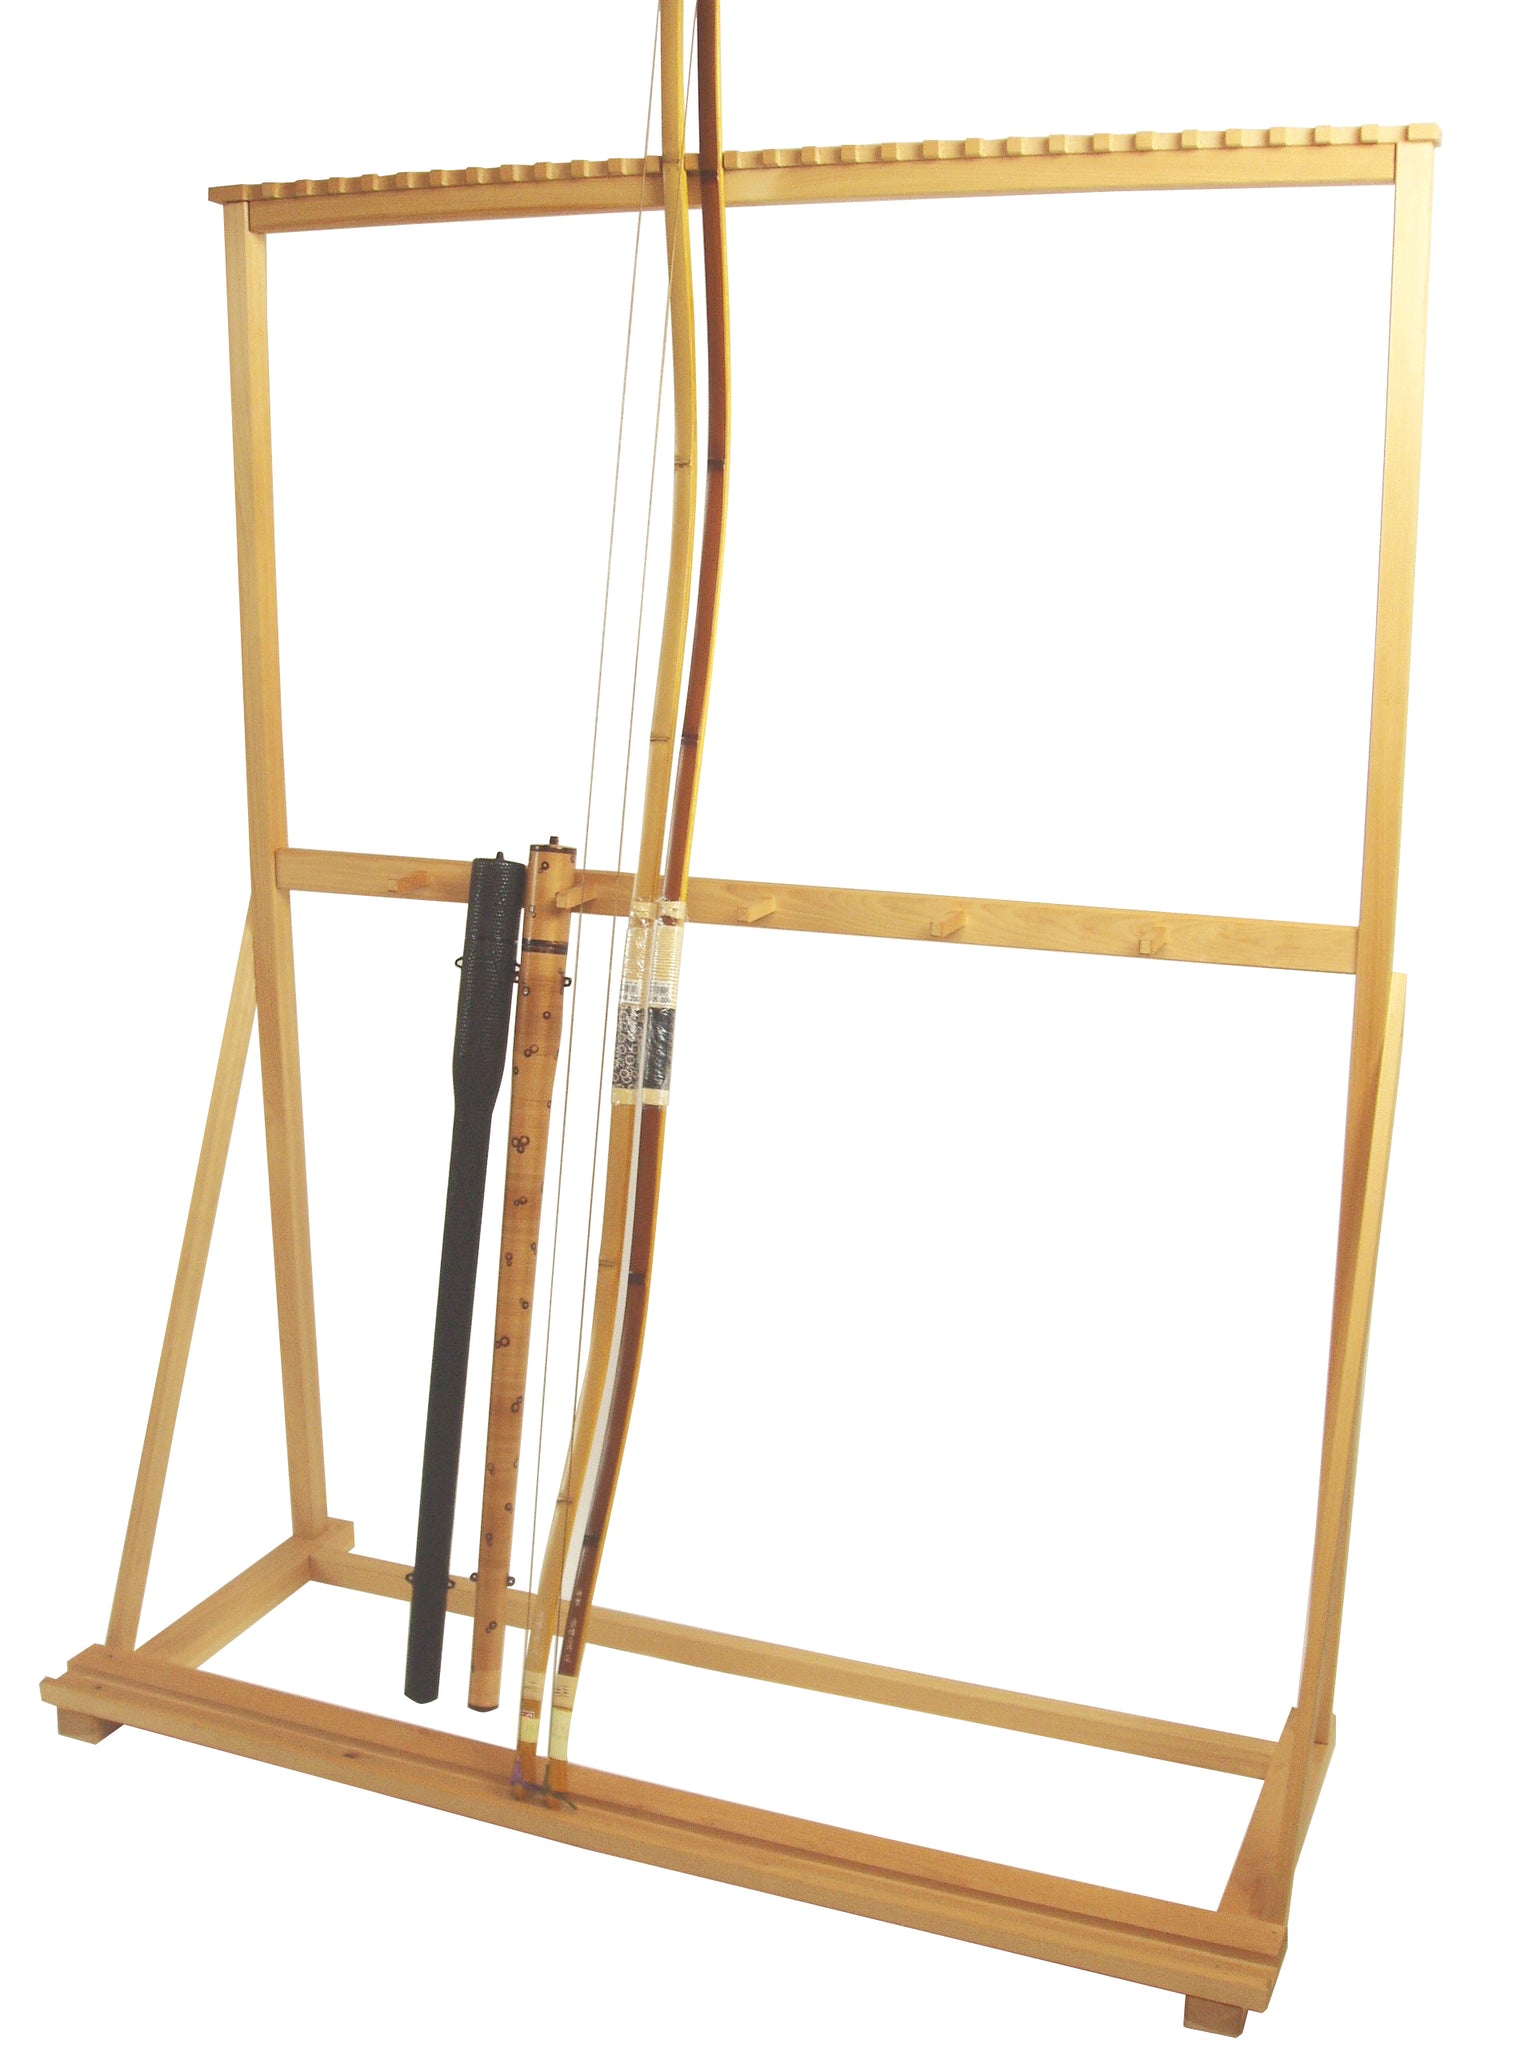 Yumitate - Bow Stand (Holds up to 30 bows)  separate shipping quote ：木製弓立て 30張用（別途送料見積り）